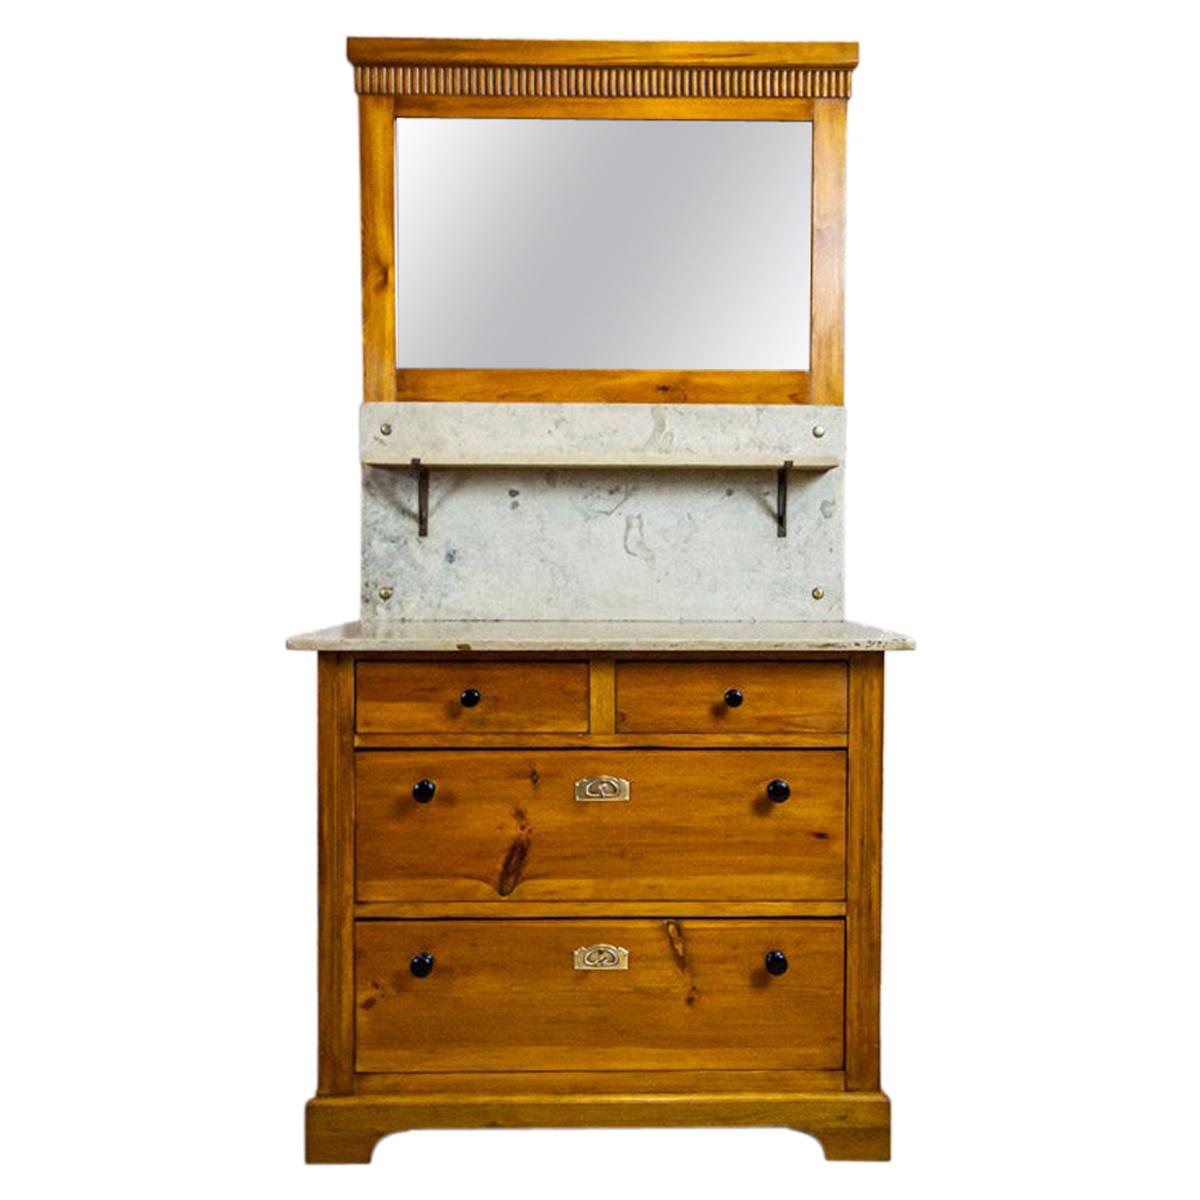 Early 20th-Century Art Nouveau Pine Commode Turned into Vanity